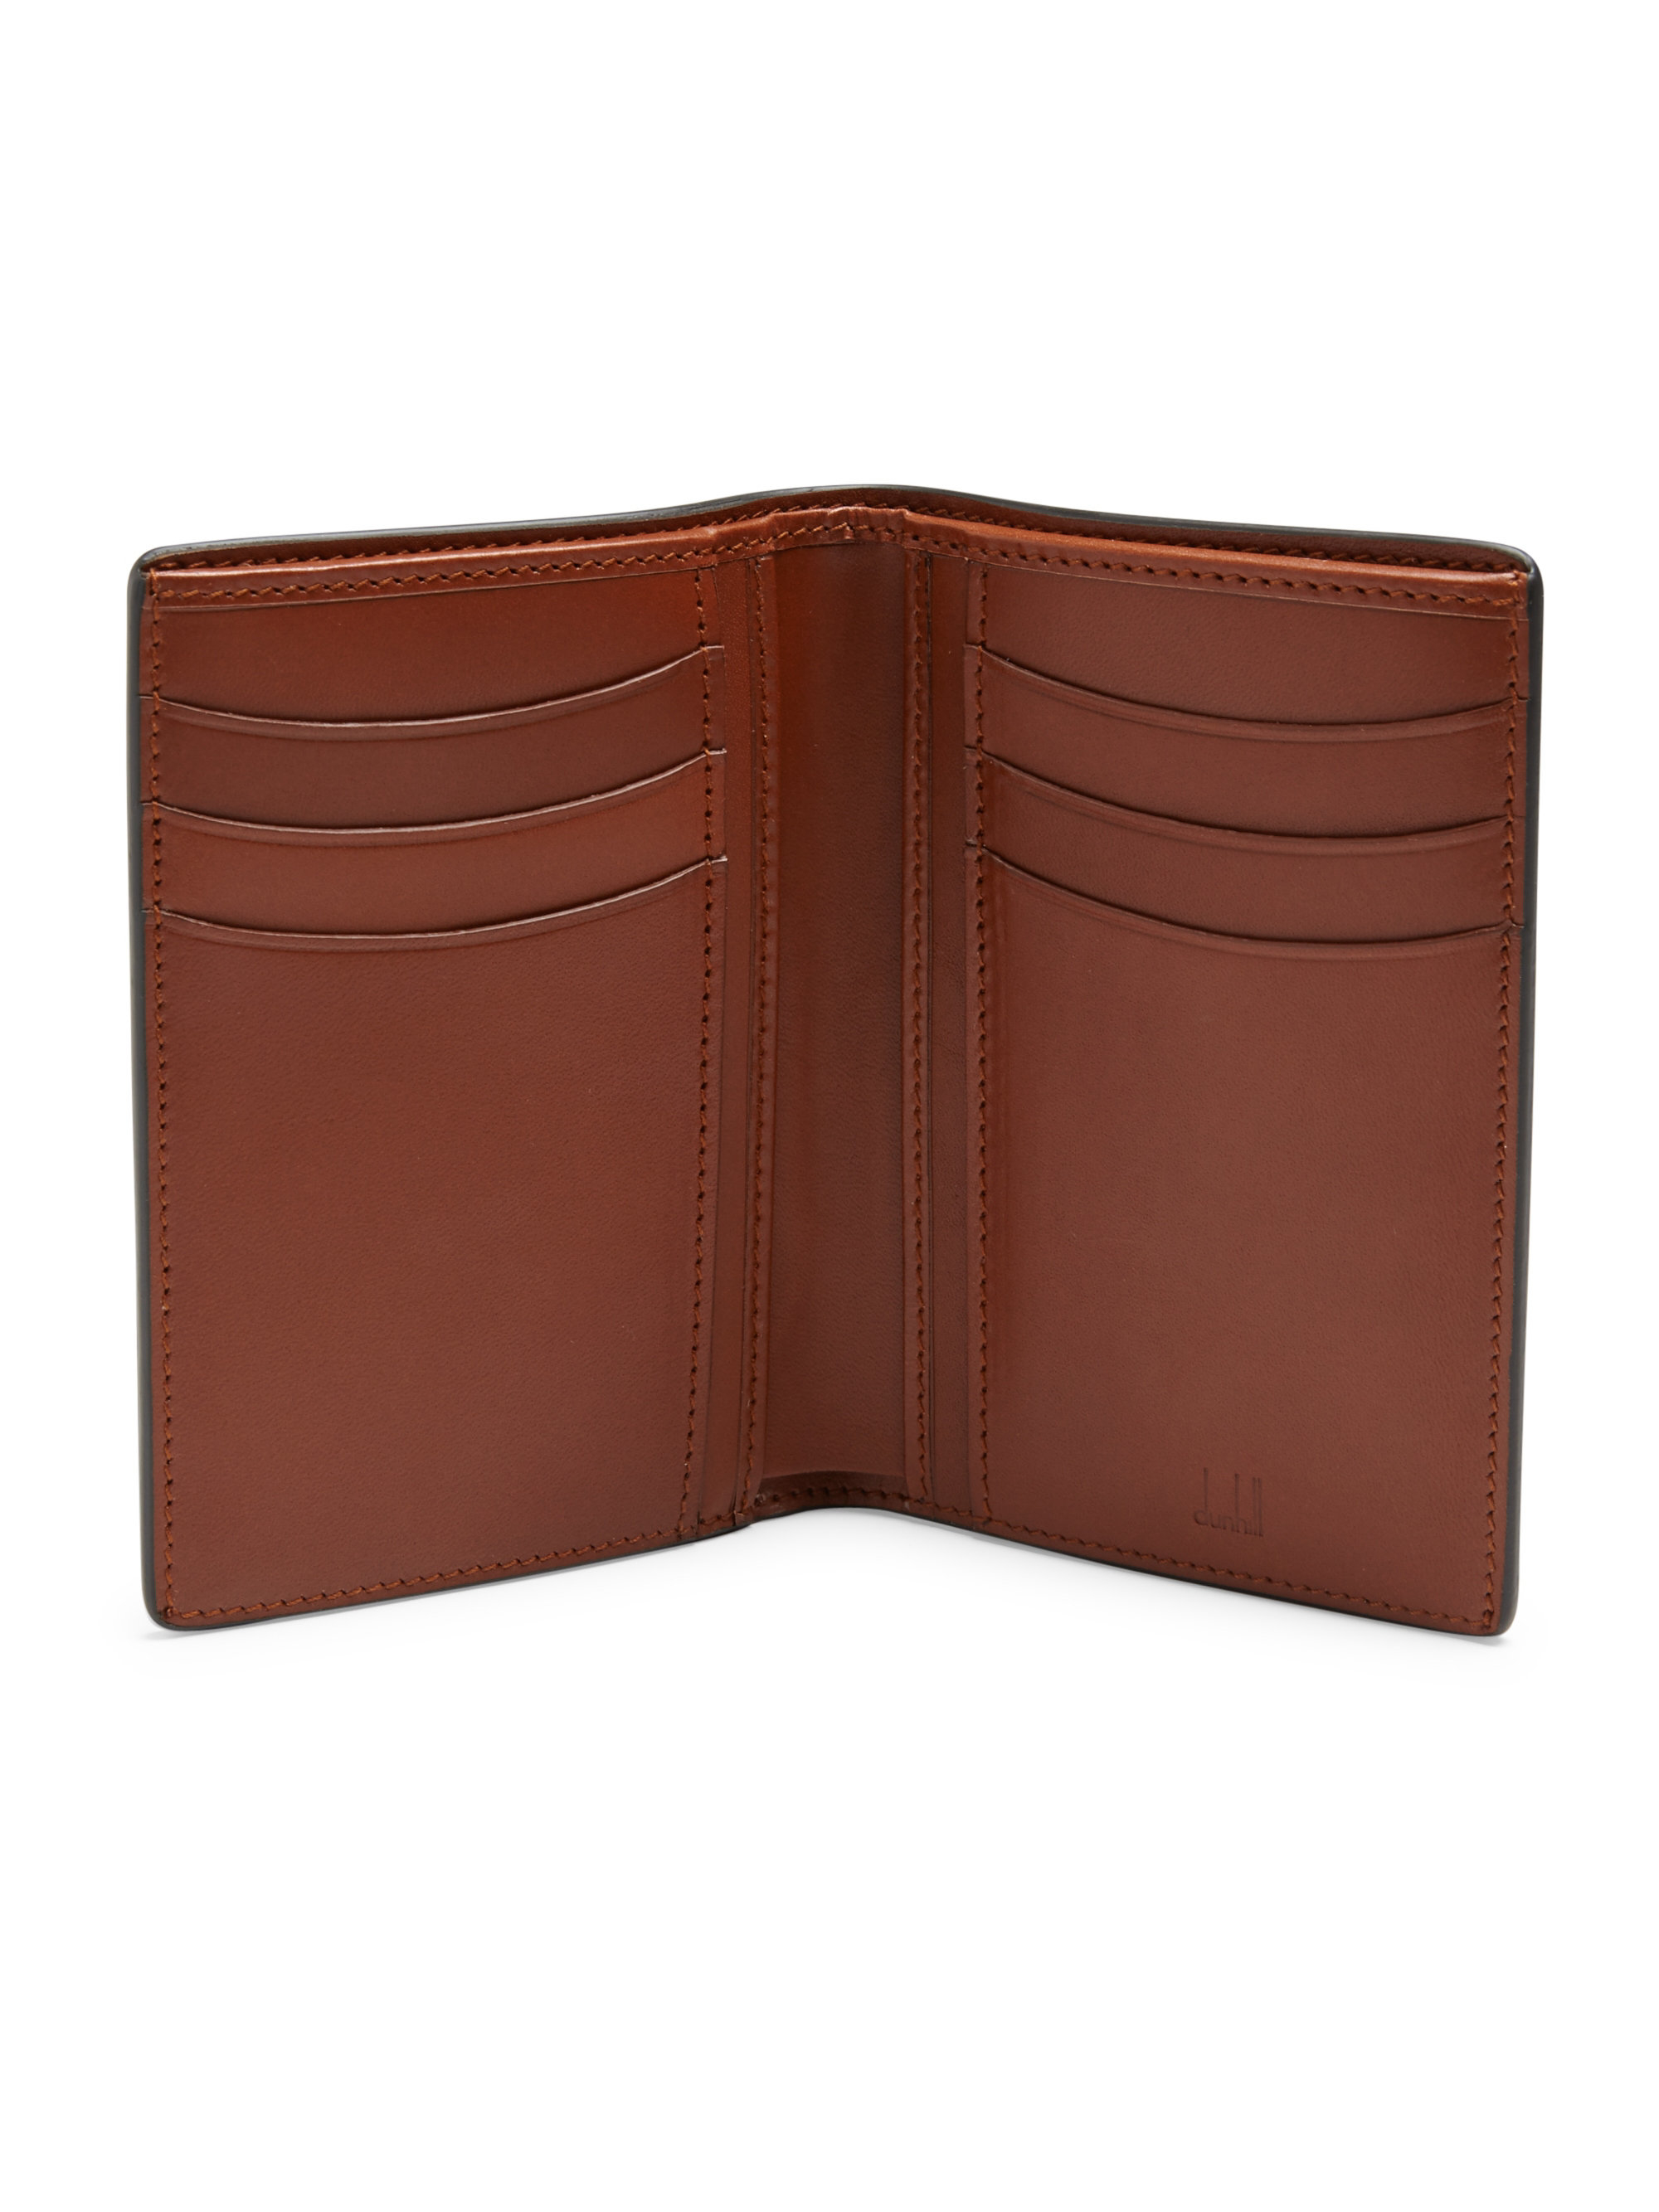 Lyst - Dunhill Chassis Small Vertical Leather Bifold Wallet in Brown ...